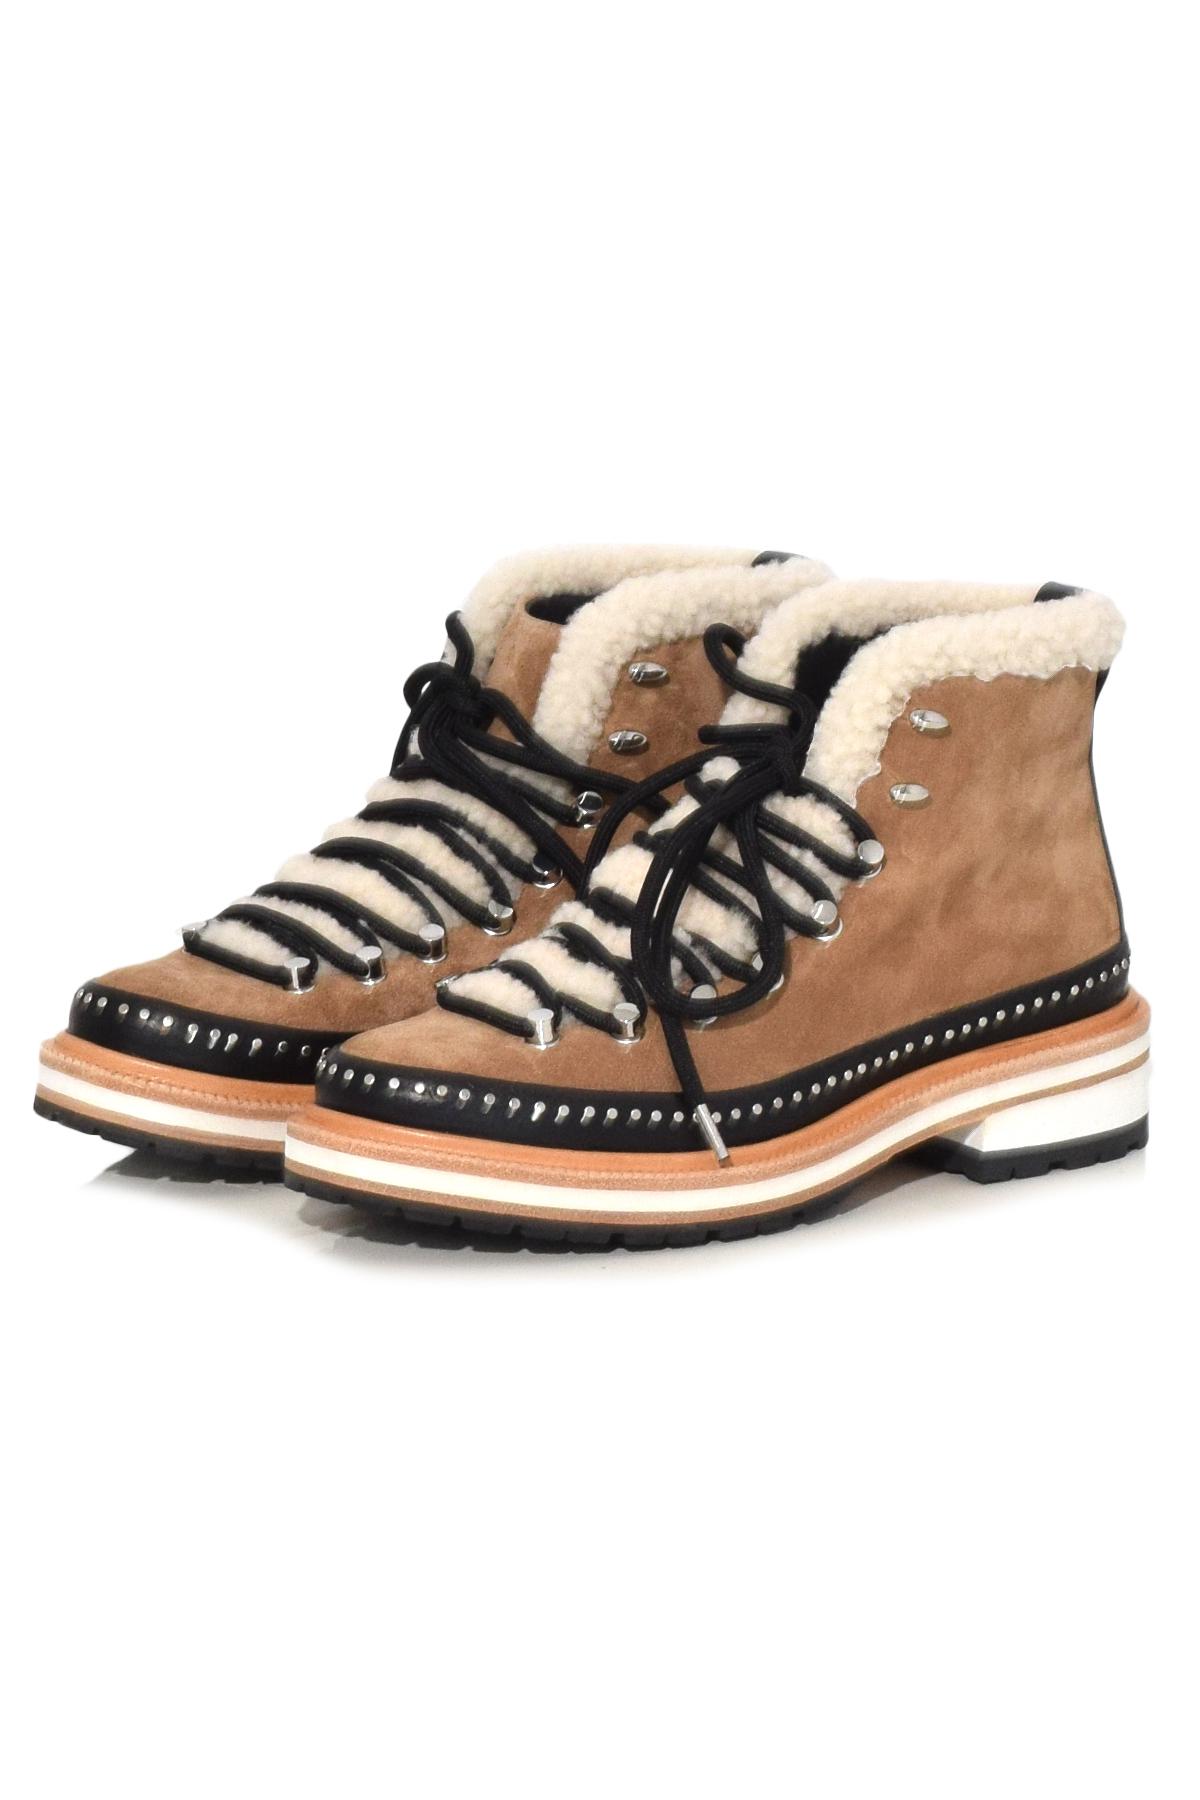 Lyst - Rag & Bone Compass Boot In Camel/shearling